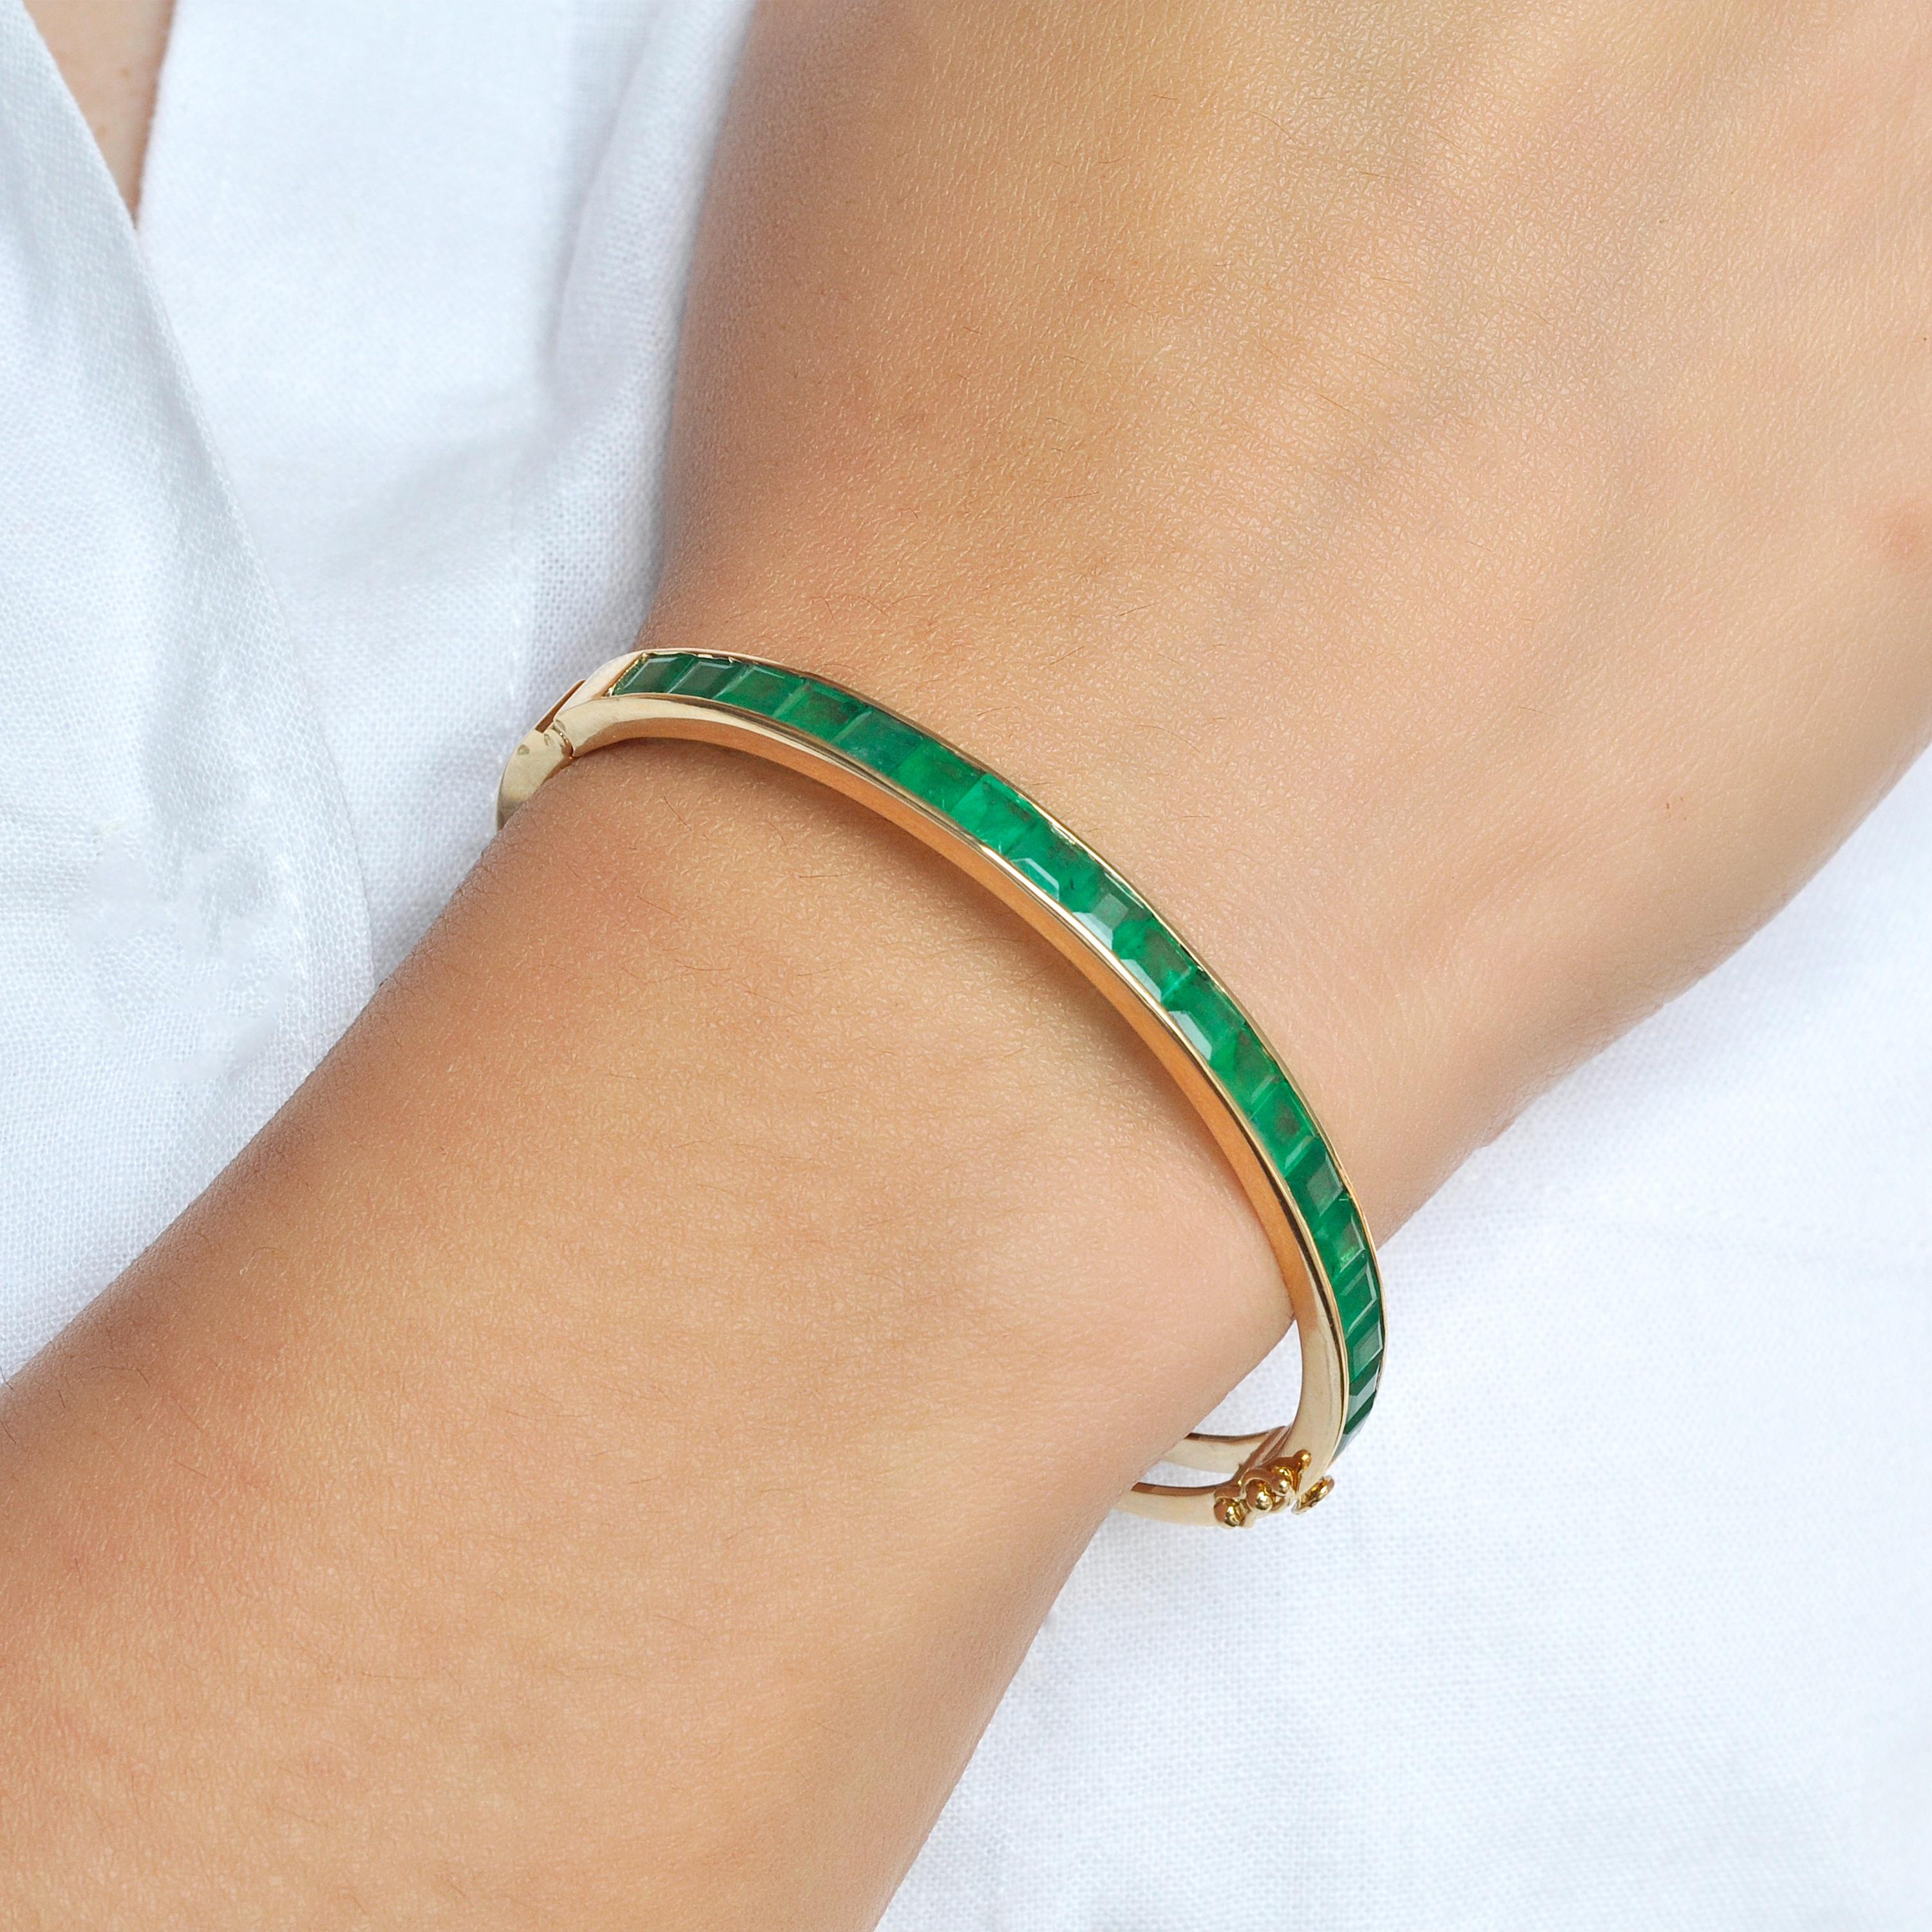 18 karat yellow gold 4mm square channel-set brazilian emerald modern bracelet.

Experience the classic emerald channel set bracelet, an embodiment of timeless elegance. Its design, a tribute to nature's charm, showcases meticulously chosen emeralds